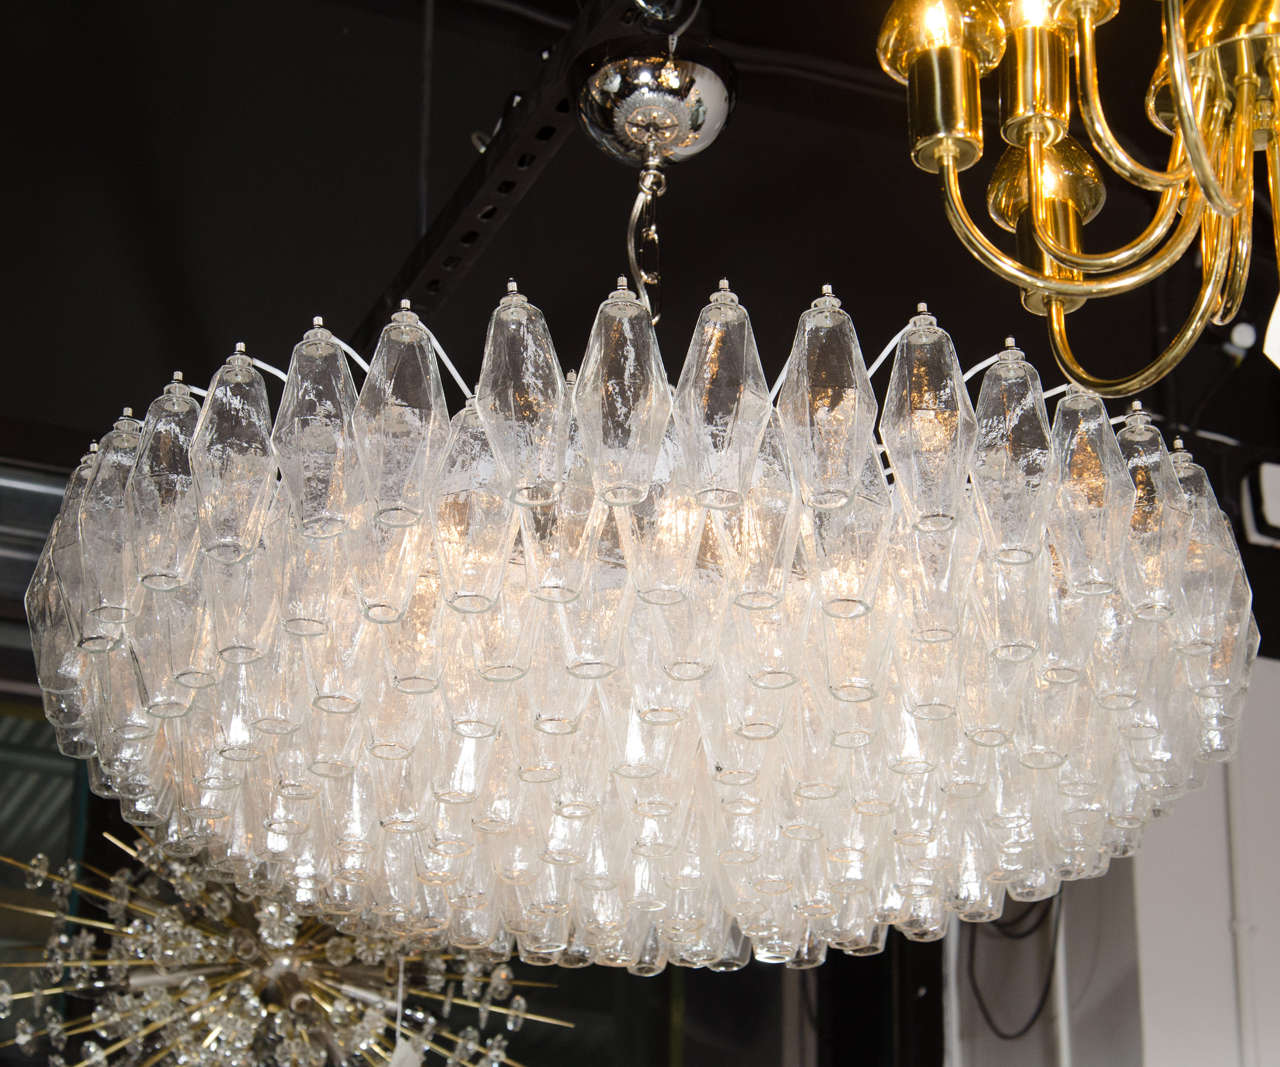 This effervescent Murano glass chandelier by Venini features numerous handblown Murano glass polyhedral shades. Each glass polyhedral shade is individually hung from its frame by hand. The frame features the slightest upward graduation from its